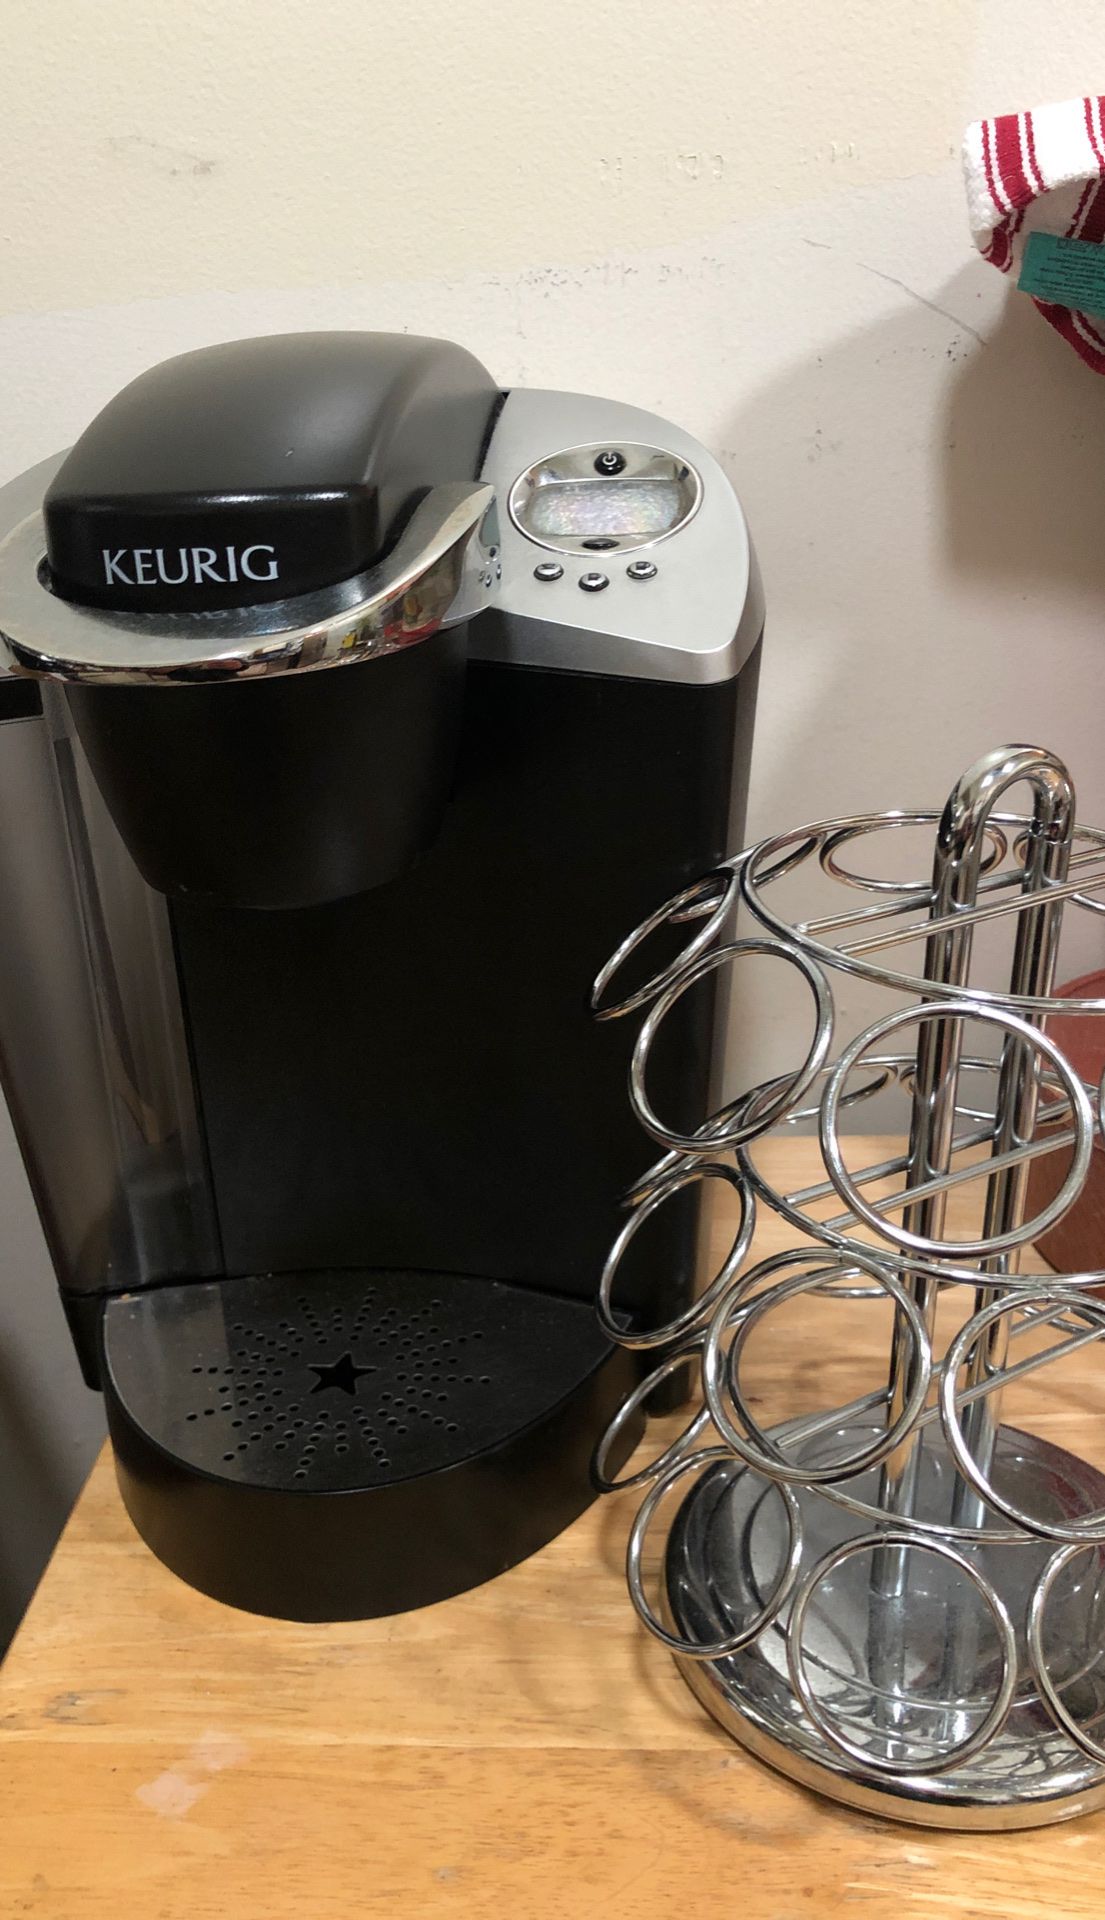 Keurig coffee maker and stand / used